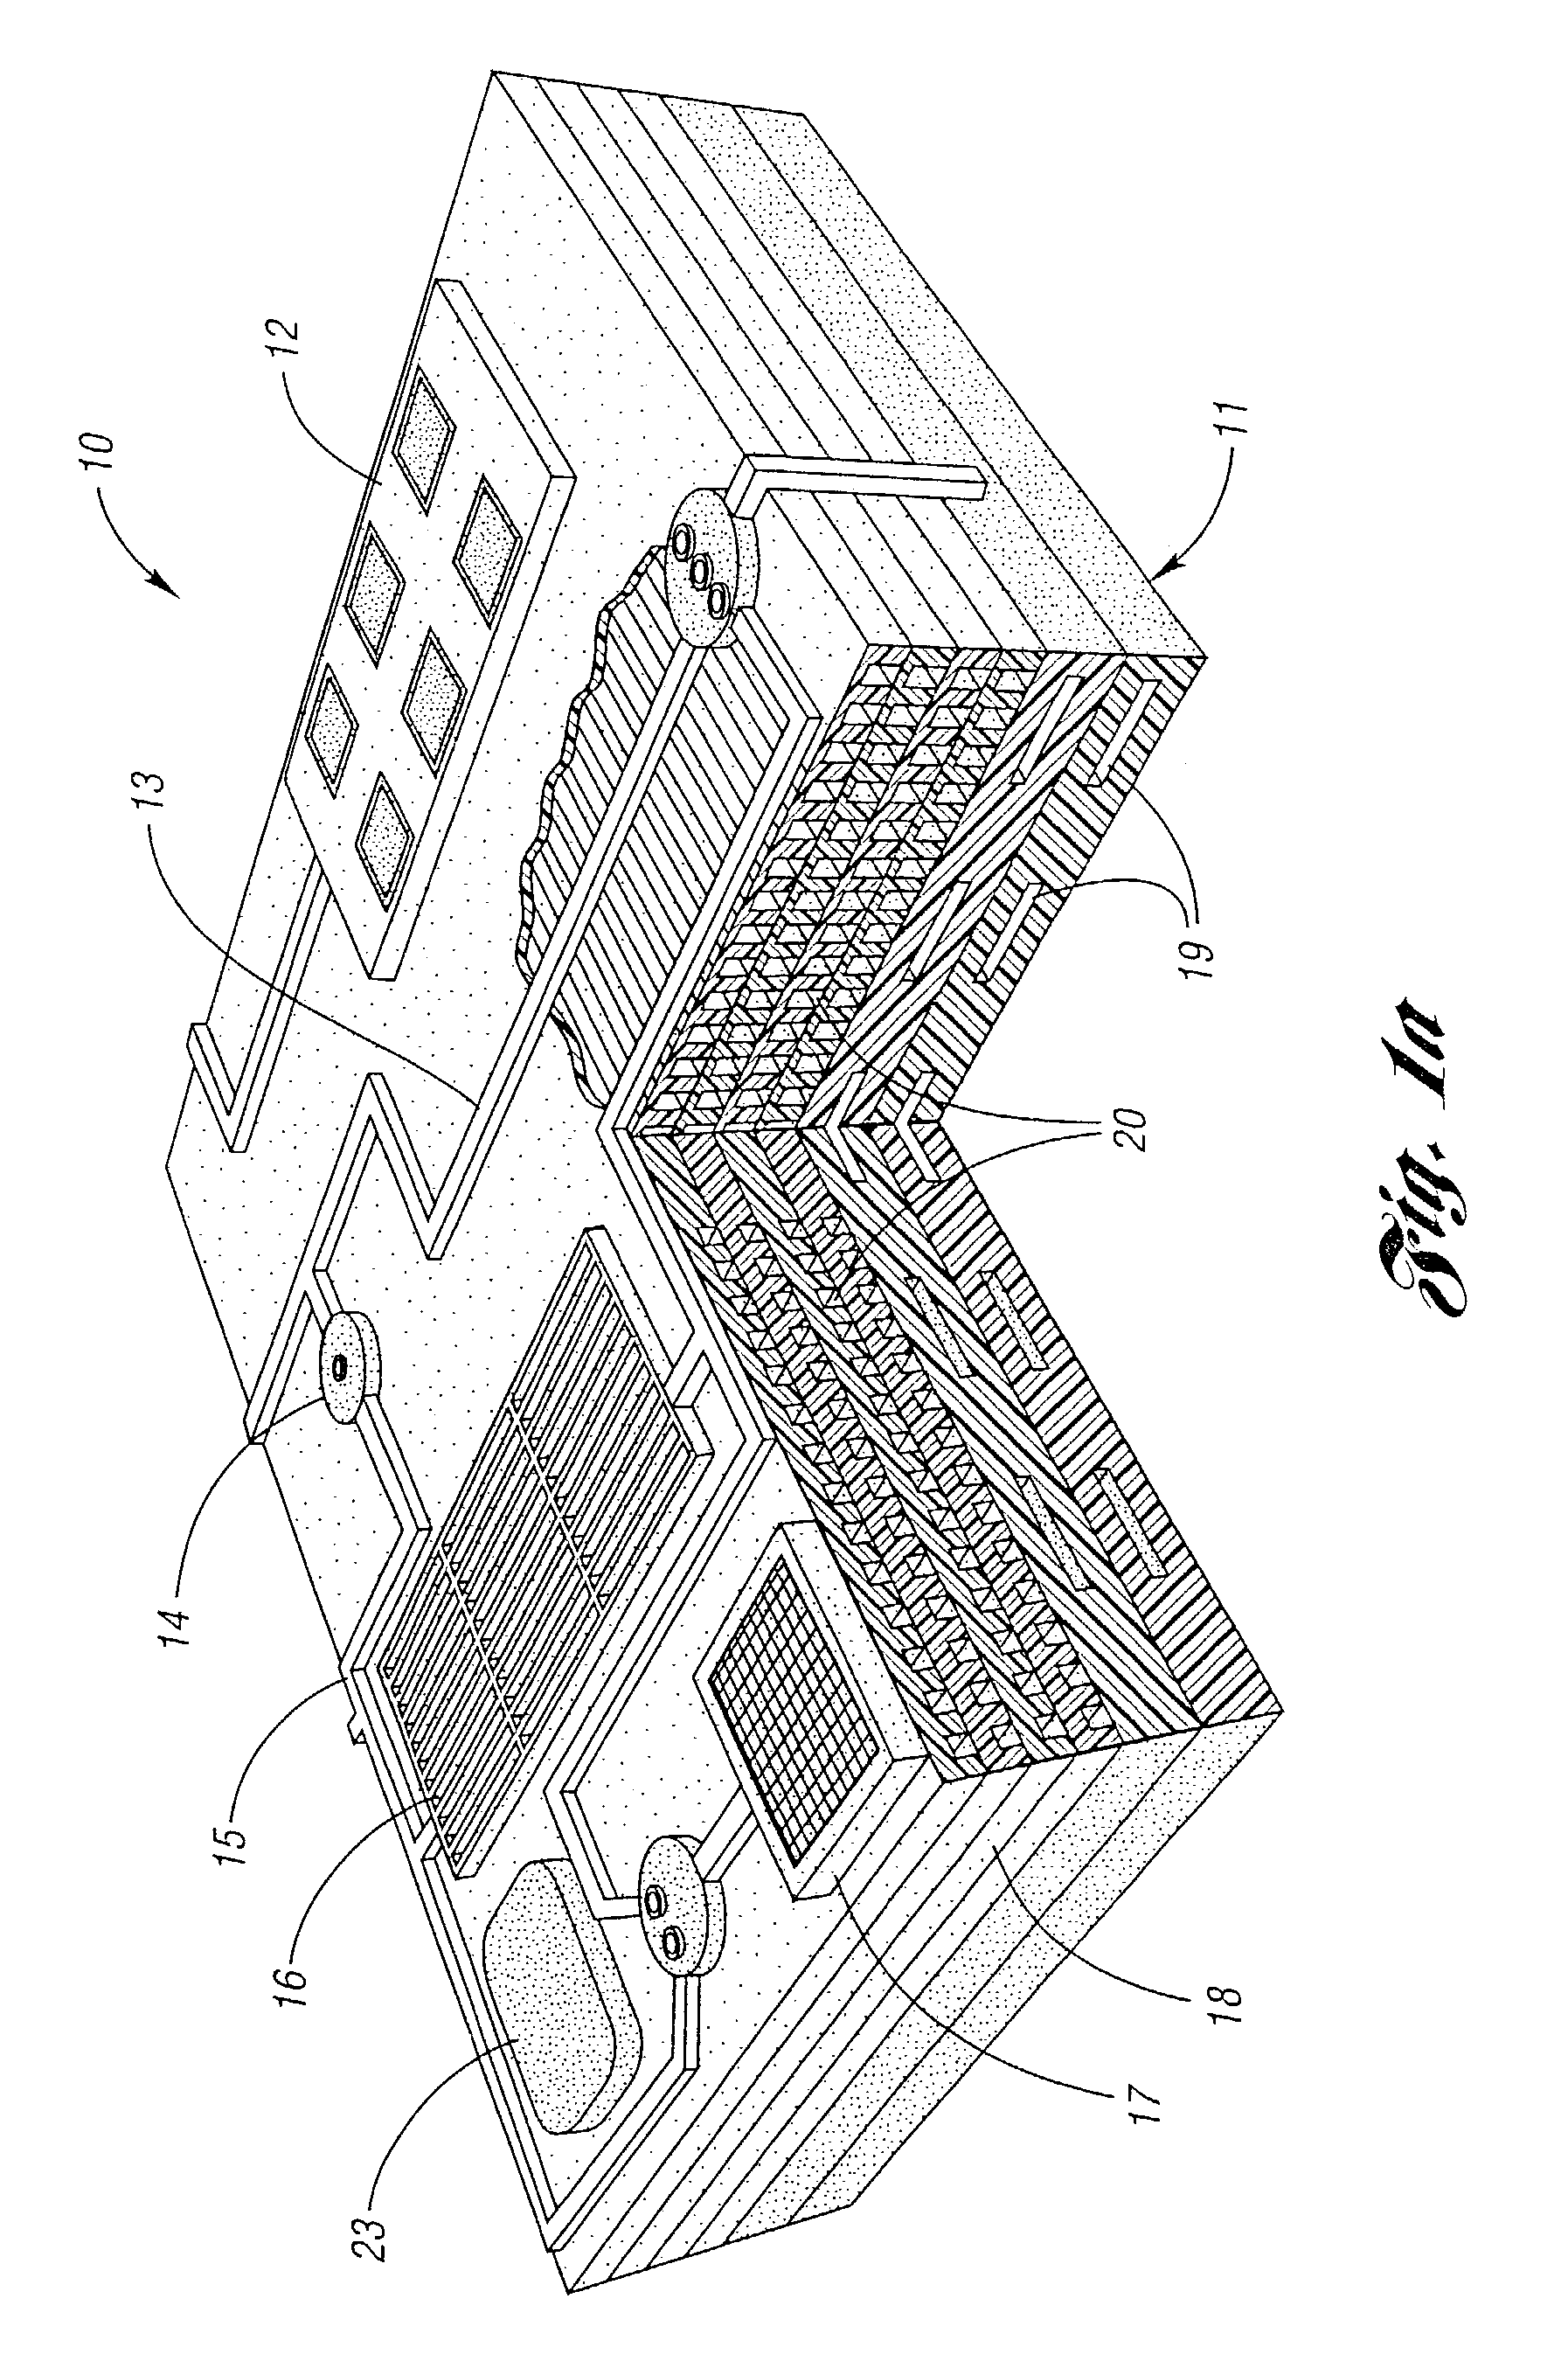 Micropump assembly for a microgas chromatograph and the like